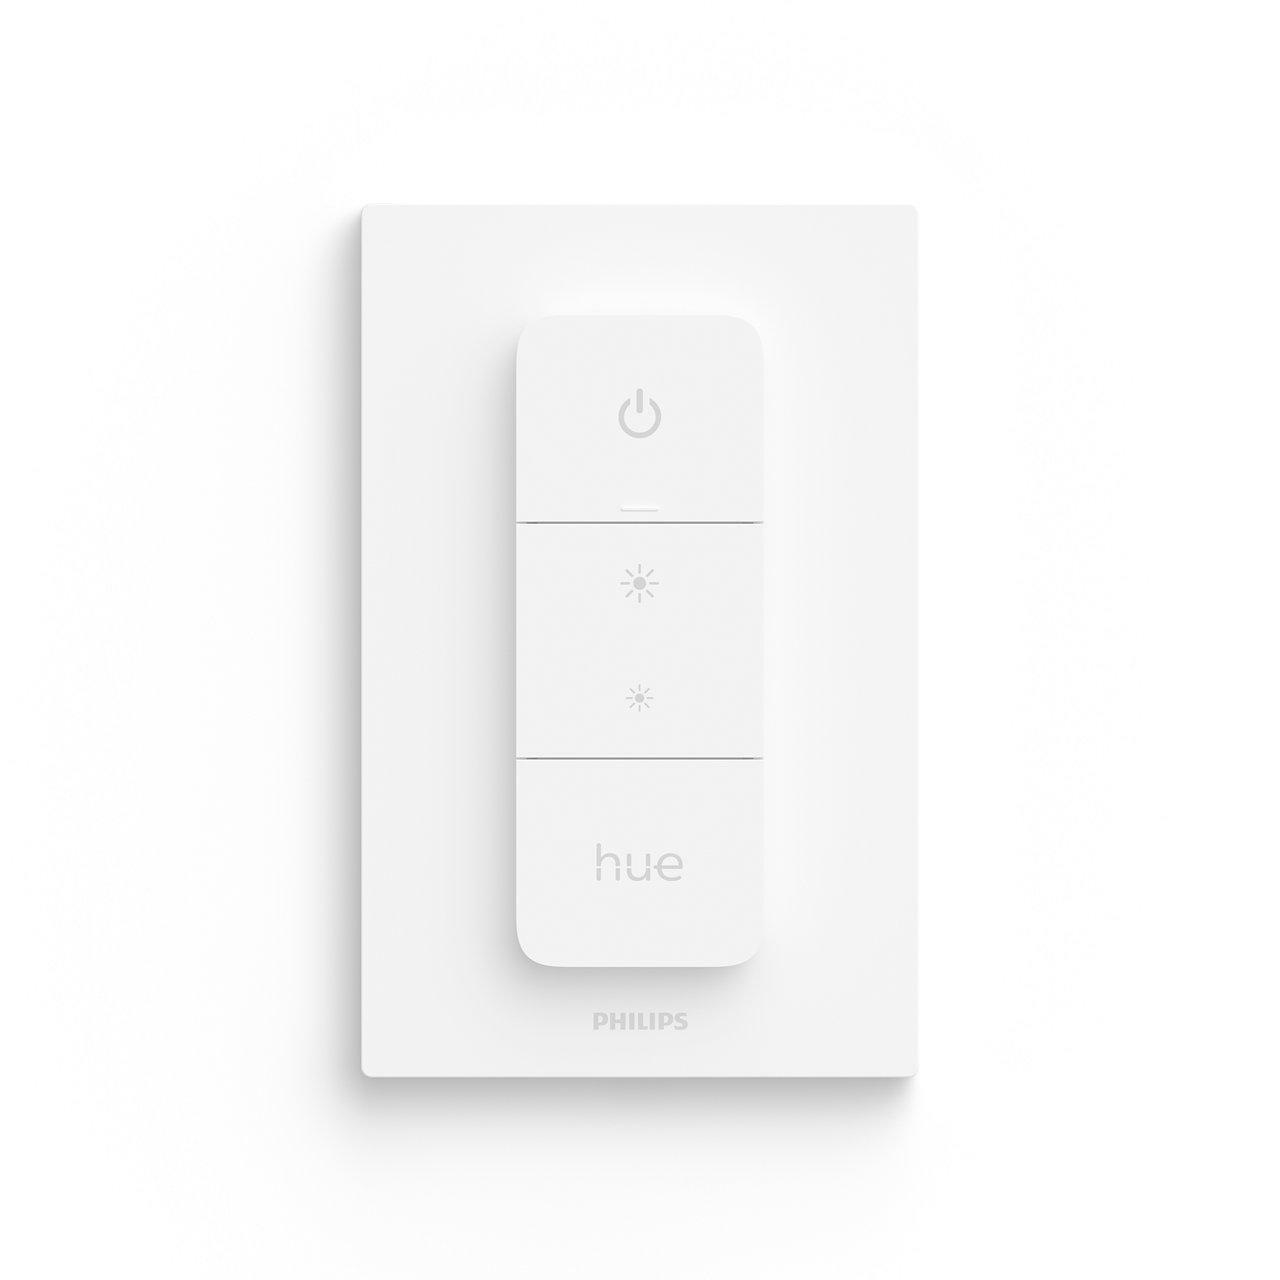 philips hue philips hue dimmer switch wifi a batteria bianco 929002398602 27461700